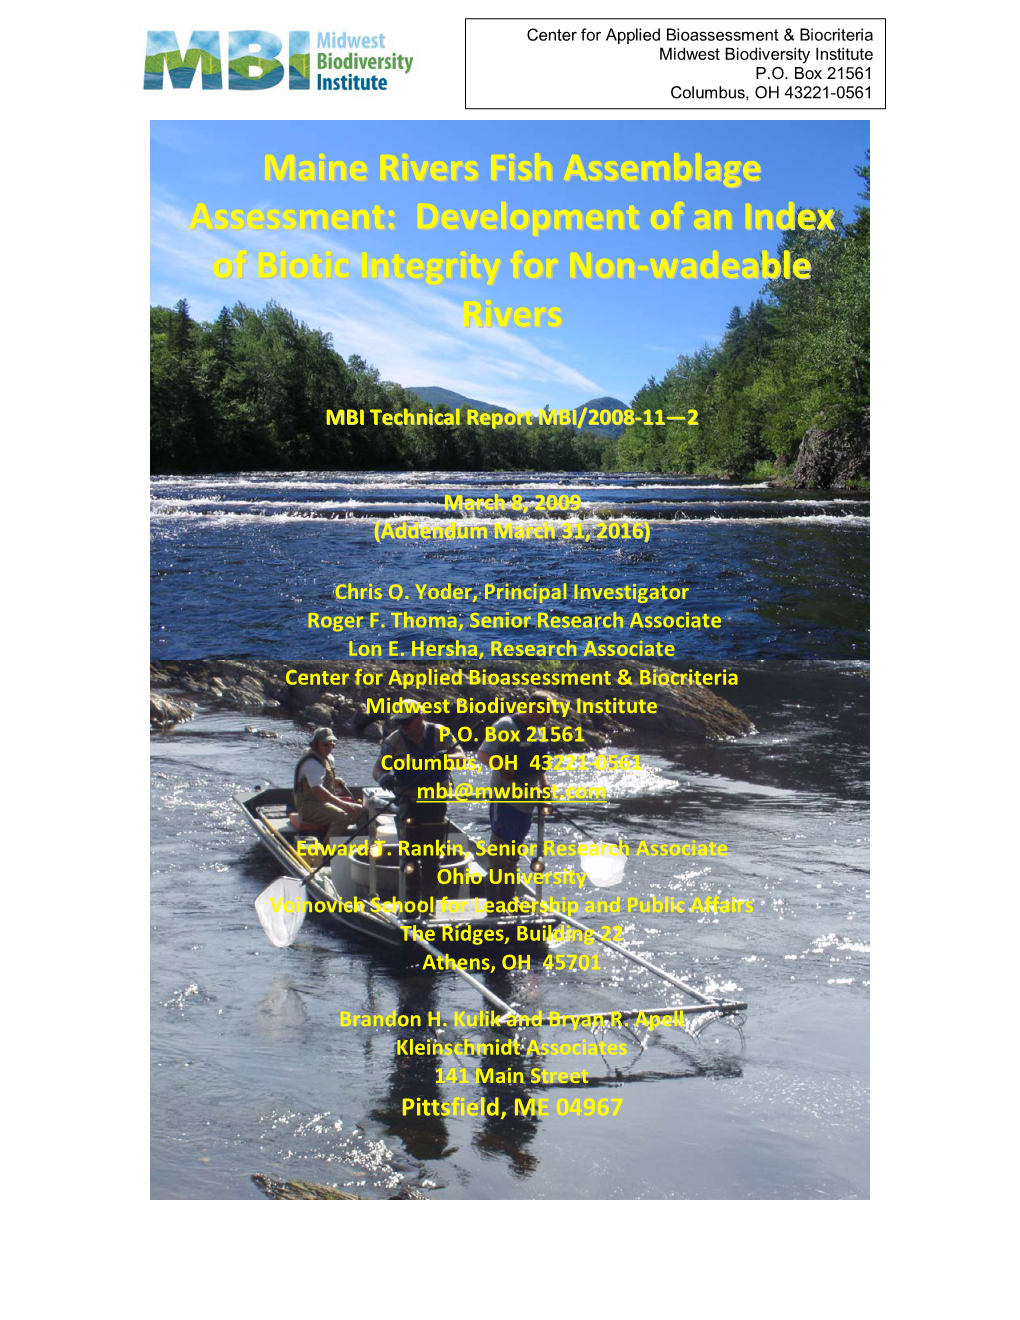 Maine Rivers Fish Assemblage Assessment: Development of an Index of Biotic Integrity for Non-Wadeable Rivers